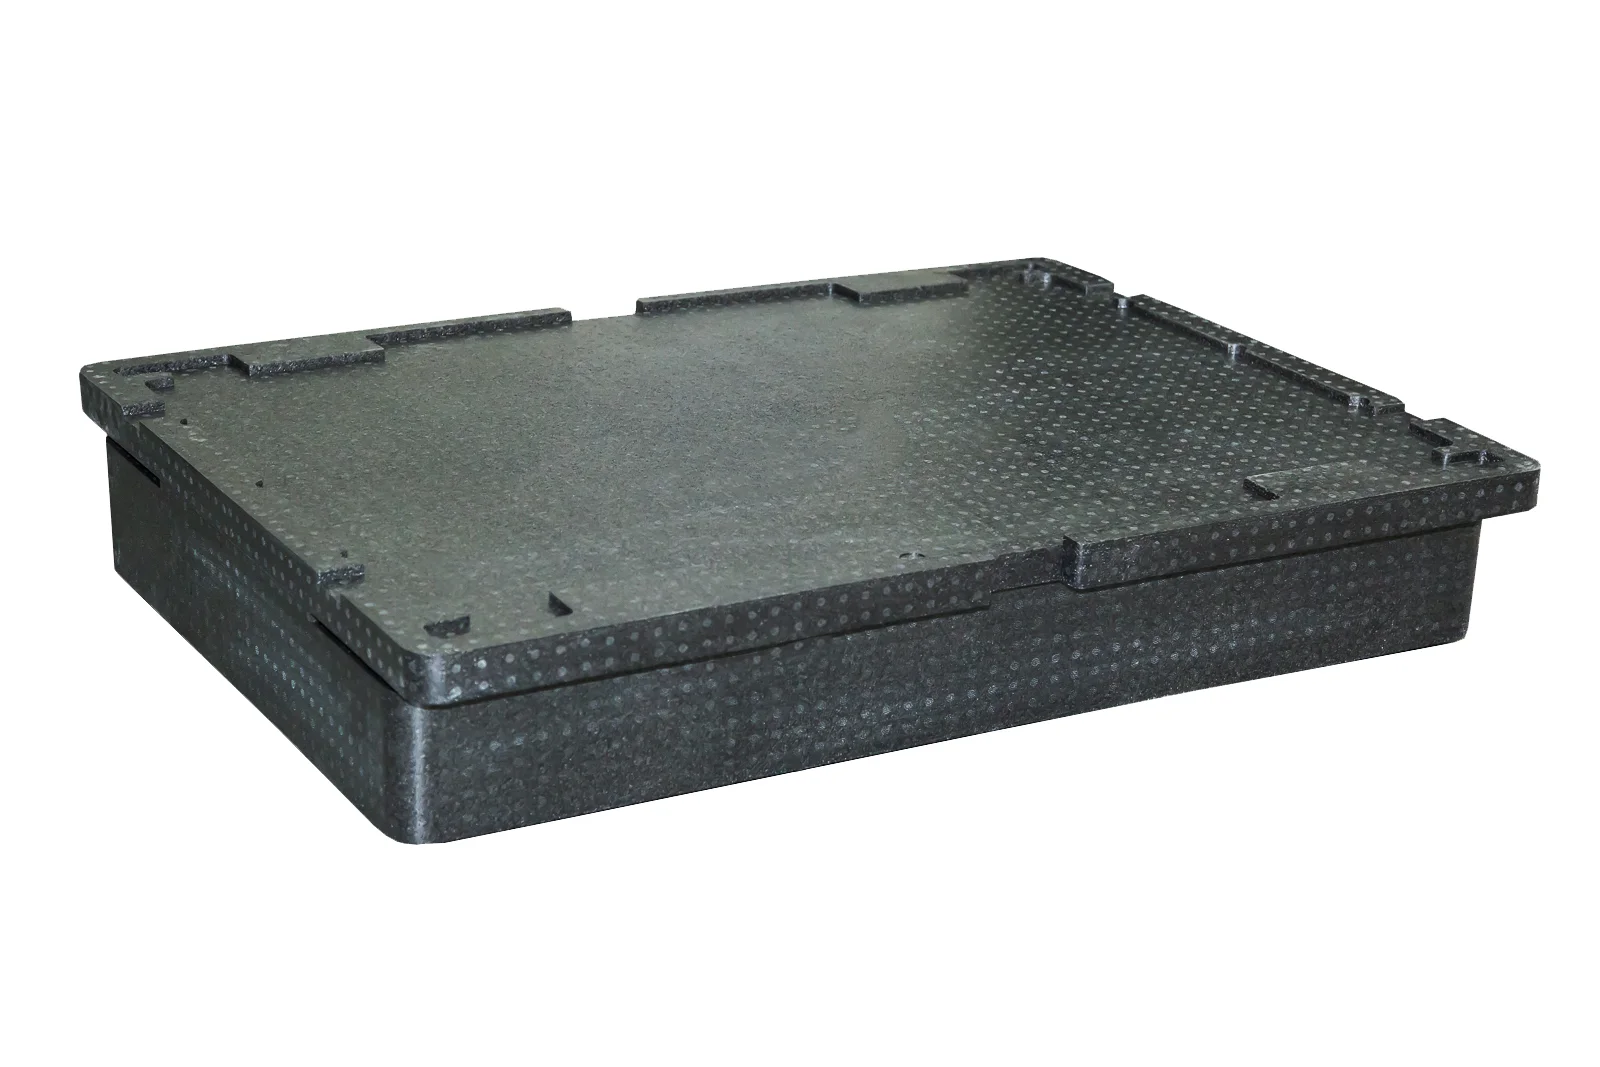 EV 2020 EPP battery dunnage tray.